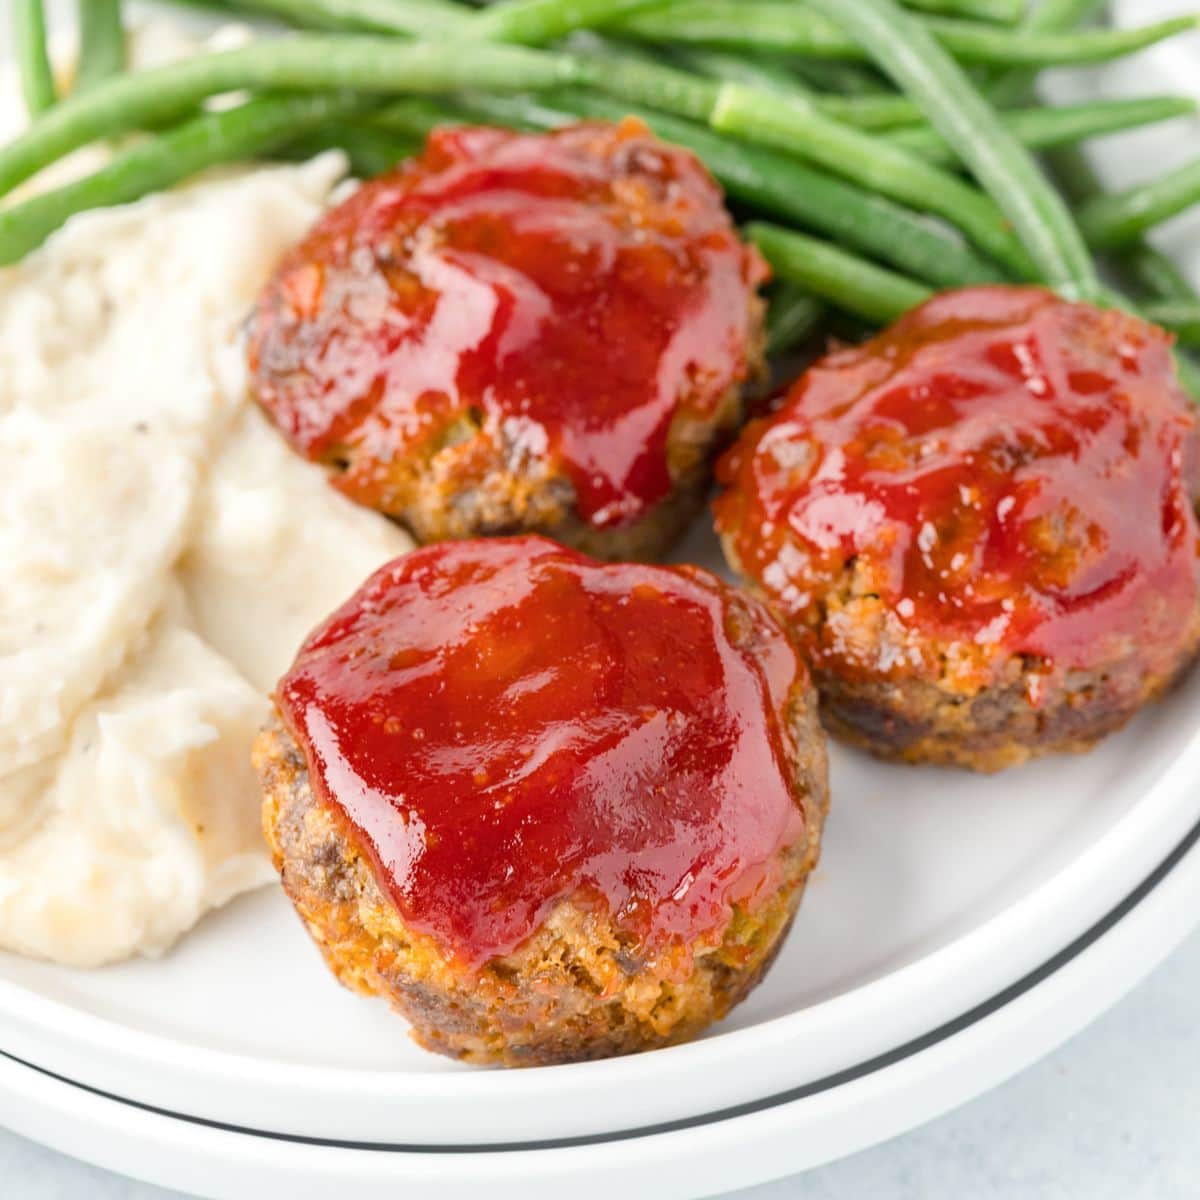 miniature meatloaves with a sweet ketchup and brown sugar glaze on white stacked plates served with mashed potatoes and green beans.